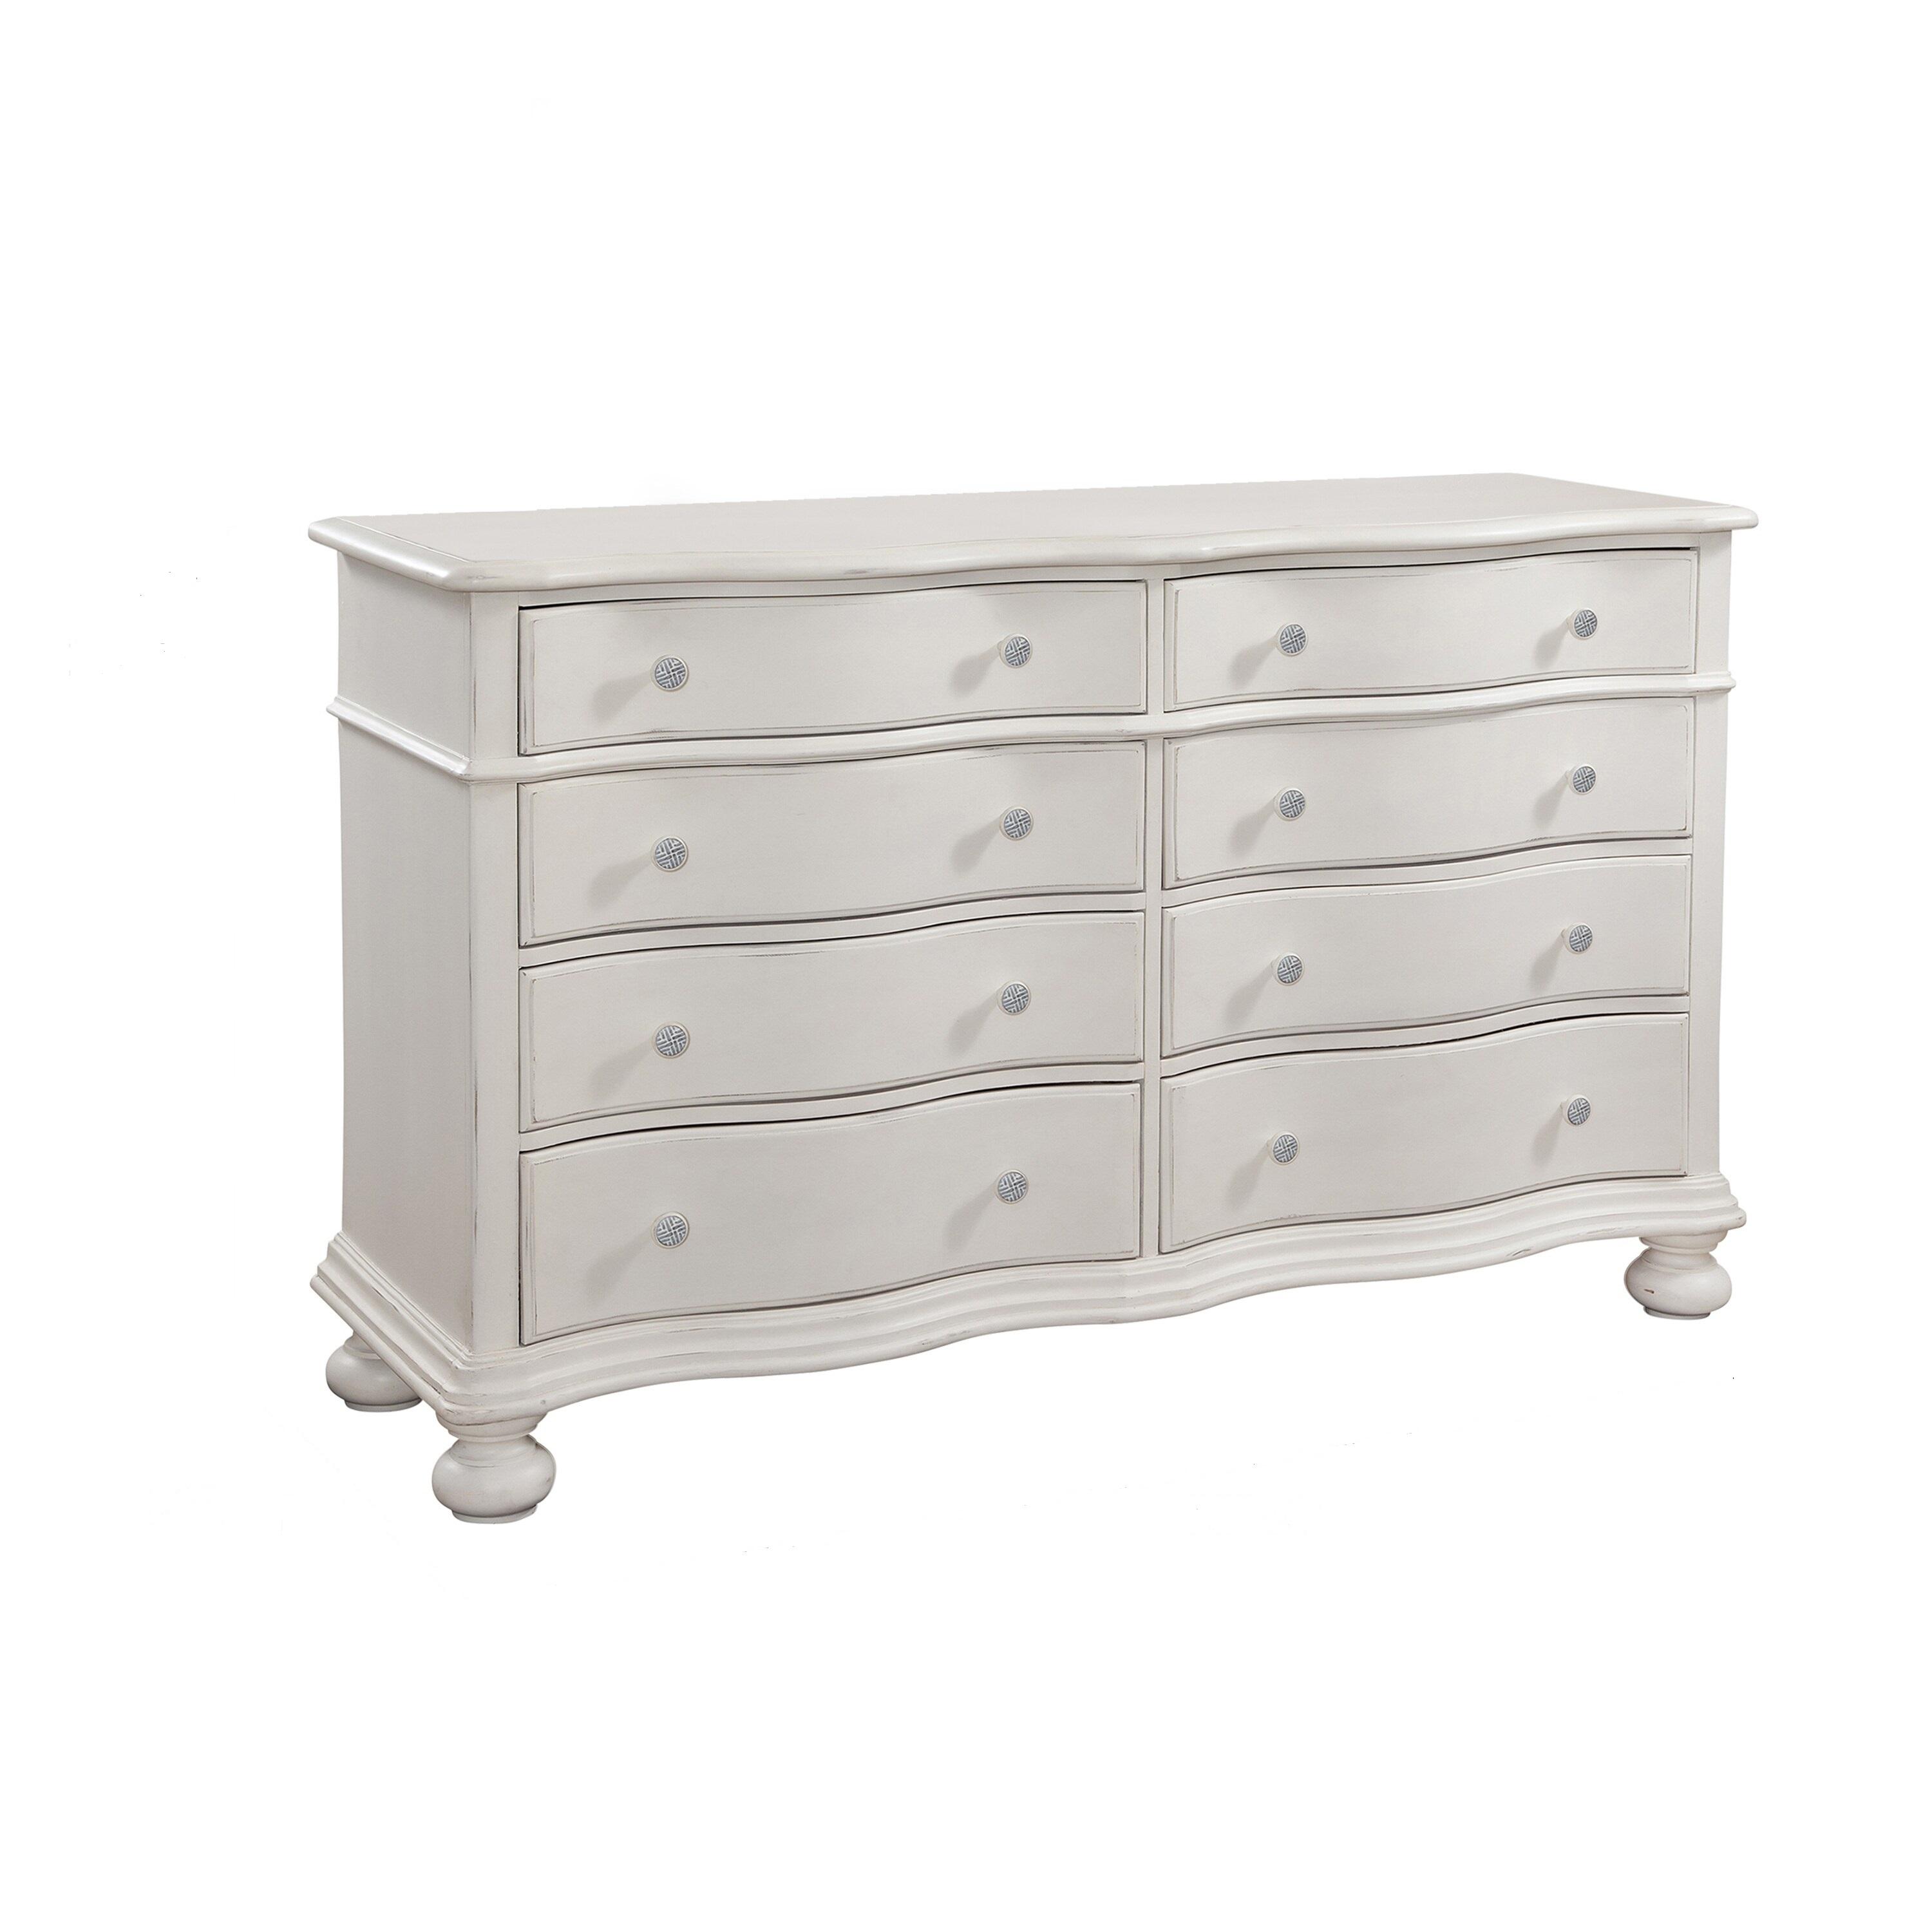 Youth, Traditional, Cottage Dresser Rodanthe 3910-280 3910-280 in White Finish 